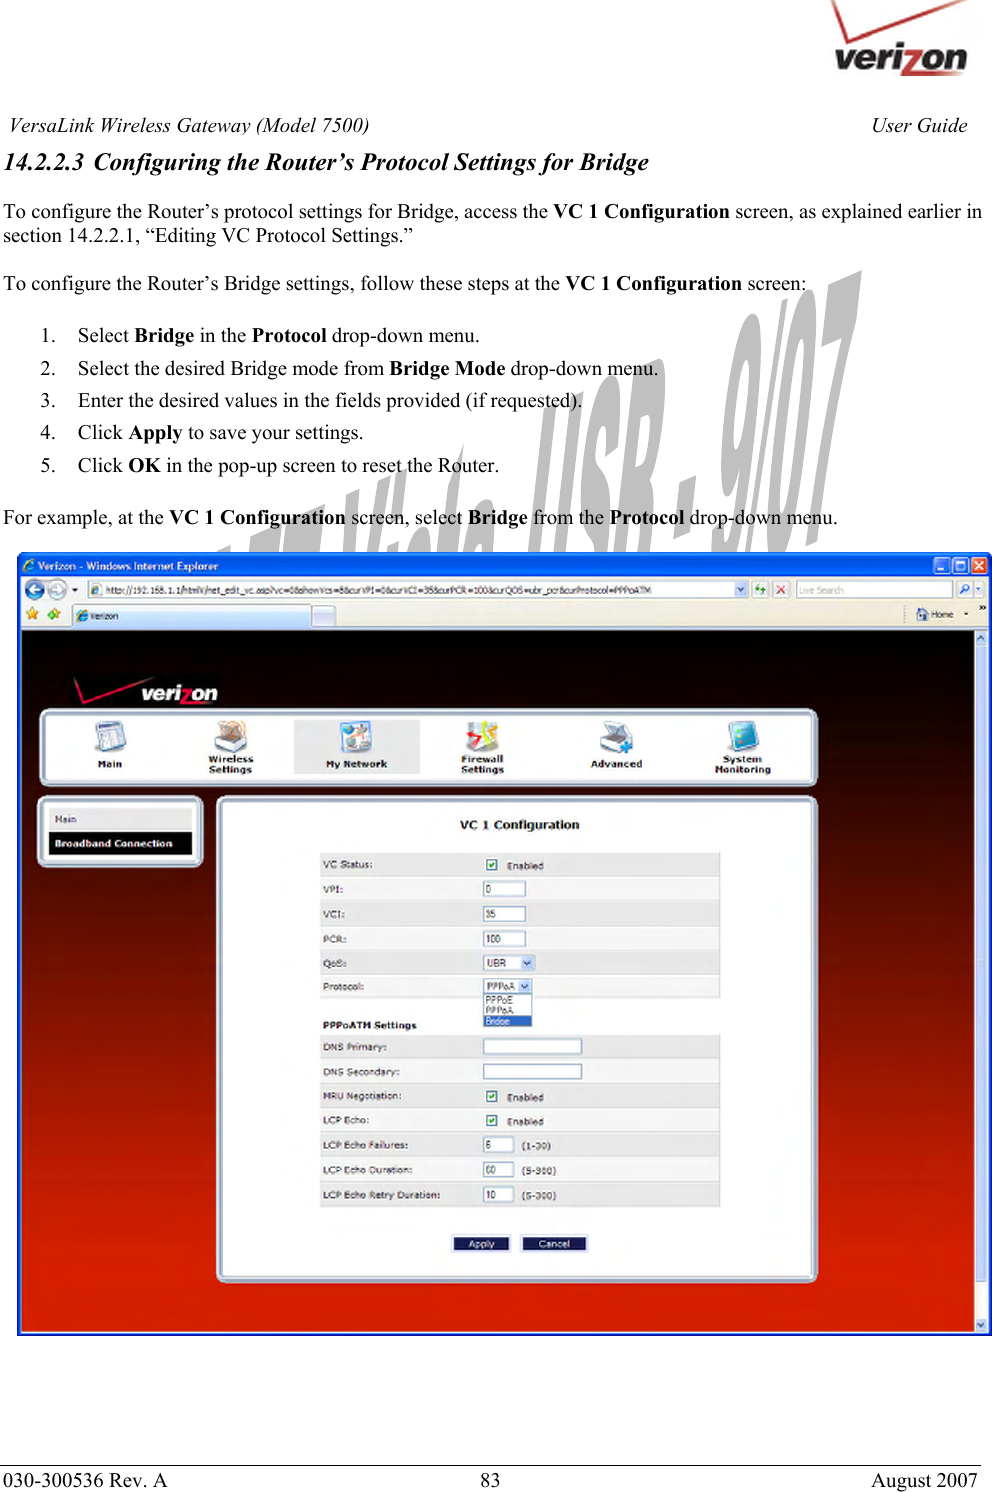       030-300536 Rev. A  83       August 2007 User GuideVersaLink Wireless Gateway (Model 7500)14.2.2.3 Configuring the Router’s Protocol Settings for Bridge  To configure the Router’s protocol settings for Bridge, access the VC 1 Configuration screen, as explained earlier in section 14.2.2.1, “Editing VC Protocol Settings.”   To configure the Router’s Bridge settings, follow these steps at the VC 1 Configuration screen:  1. Select Bridge in the Protocol drop-down menu. 2. Select the desired Bridge mode from Bridge Mode drop-down menu. 3. Enter the desired values in the fields provided (if requested). 4. Click Apply to save your settings. 5. Click OK in the pop-up screen to reset the Router.   For example, at the VC 1 Configuration screen, select Bridge from the Protocol drop-down menu.         